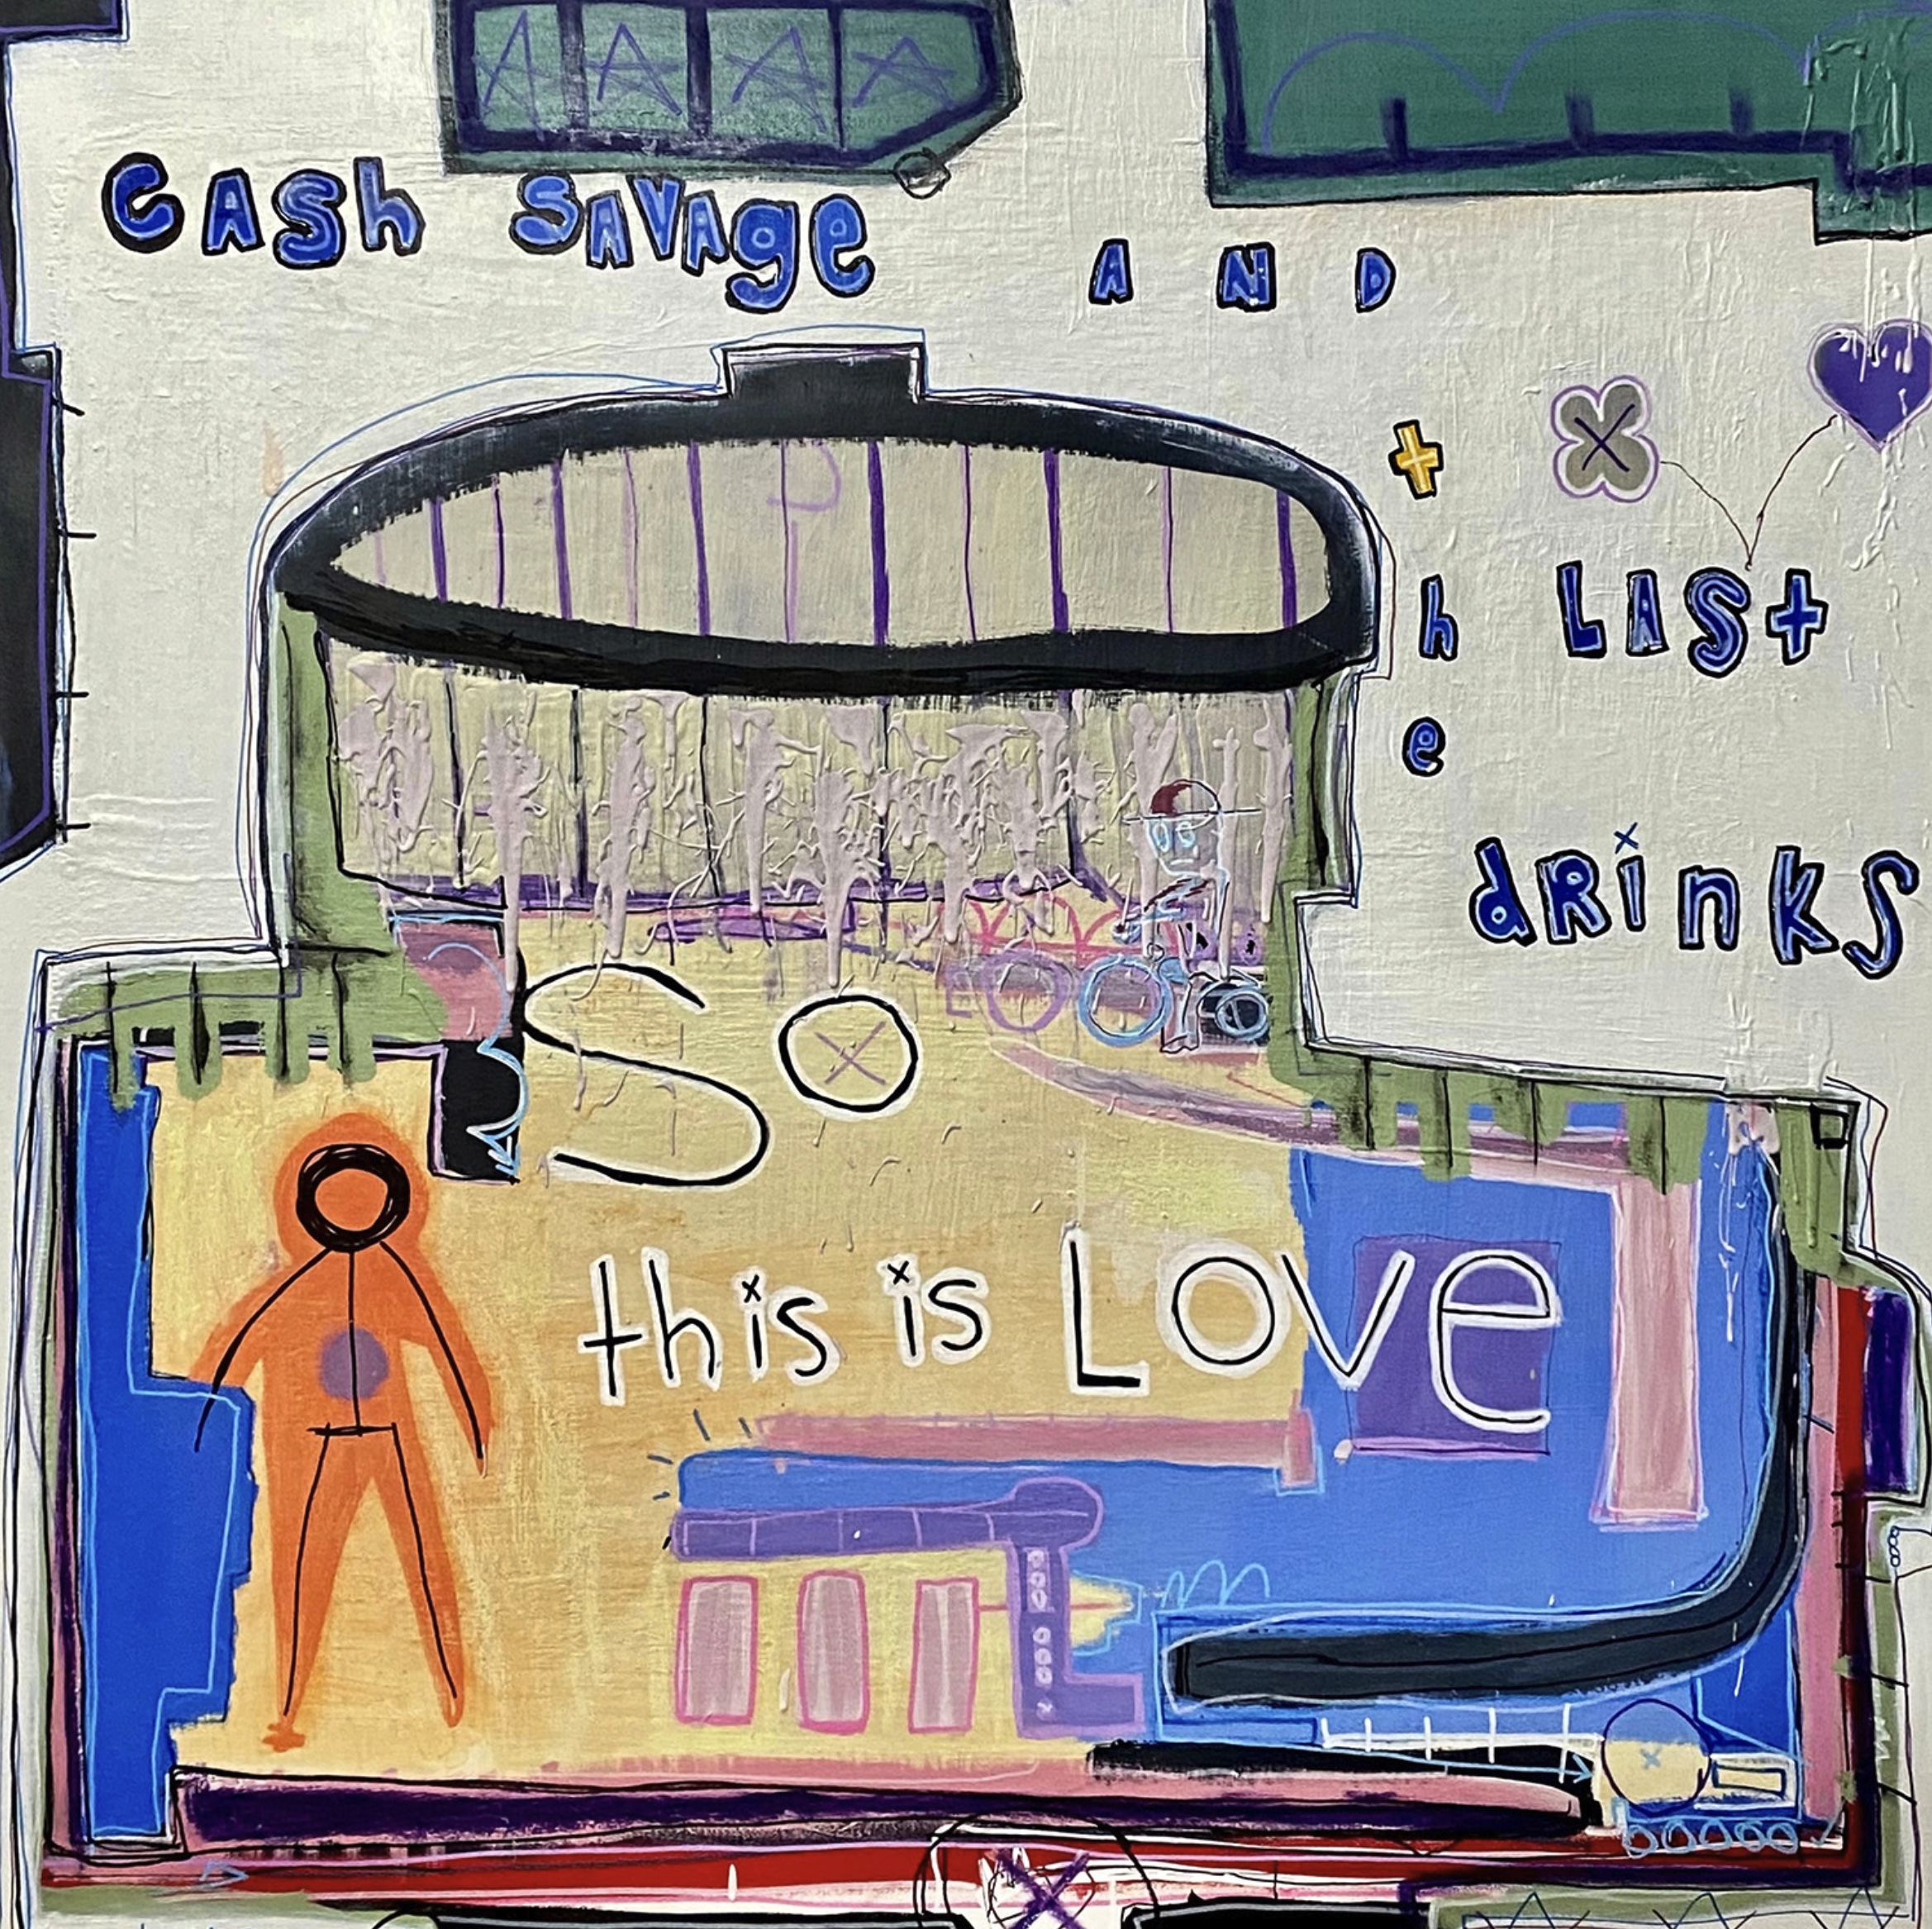 With their distinct slacker-rock sound, sharp lyricism, and candid storytelling, Cash Savage and the Last Drinks have once again captivated music lovers with their much-anticipated new album, So This Is Love.